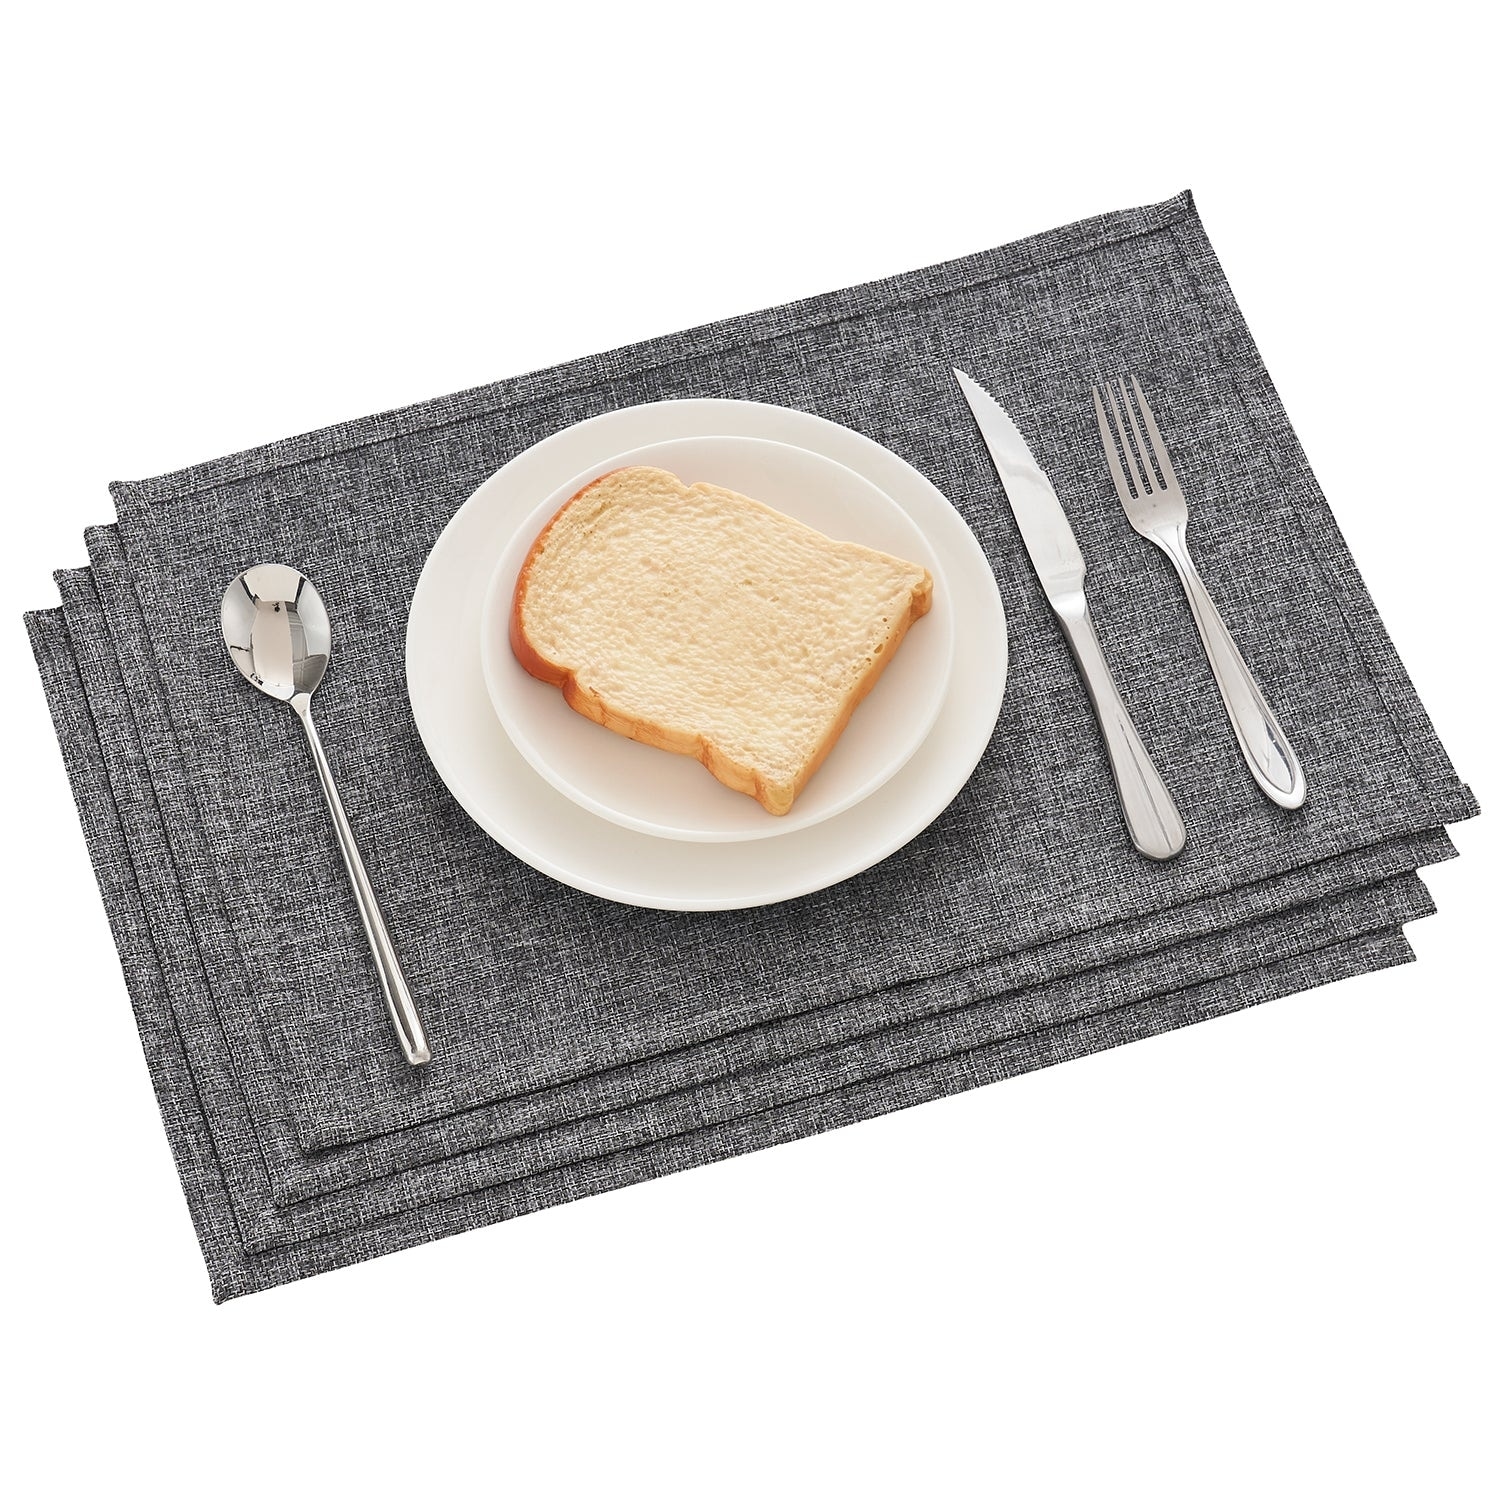 Linen Placemats Set of 4, Heat Resistant Dining Table Place Mats